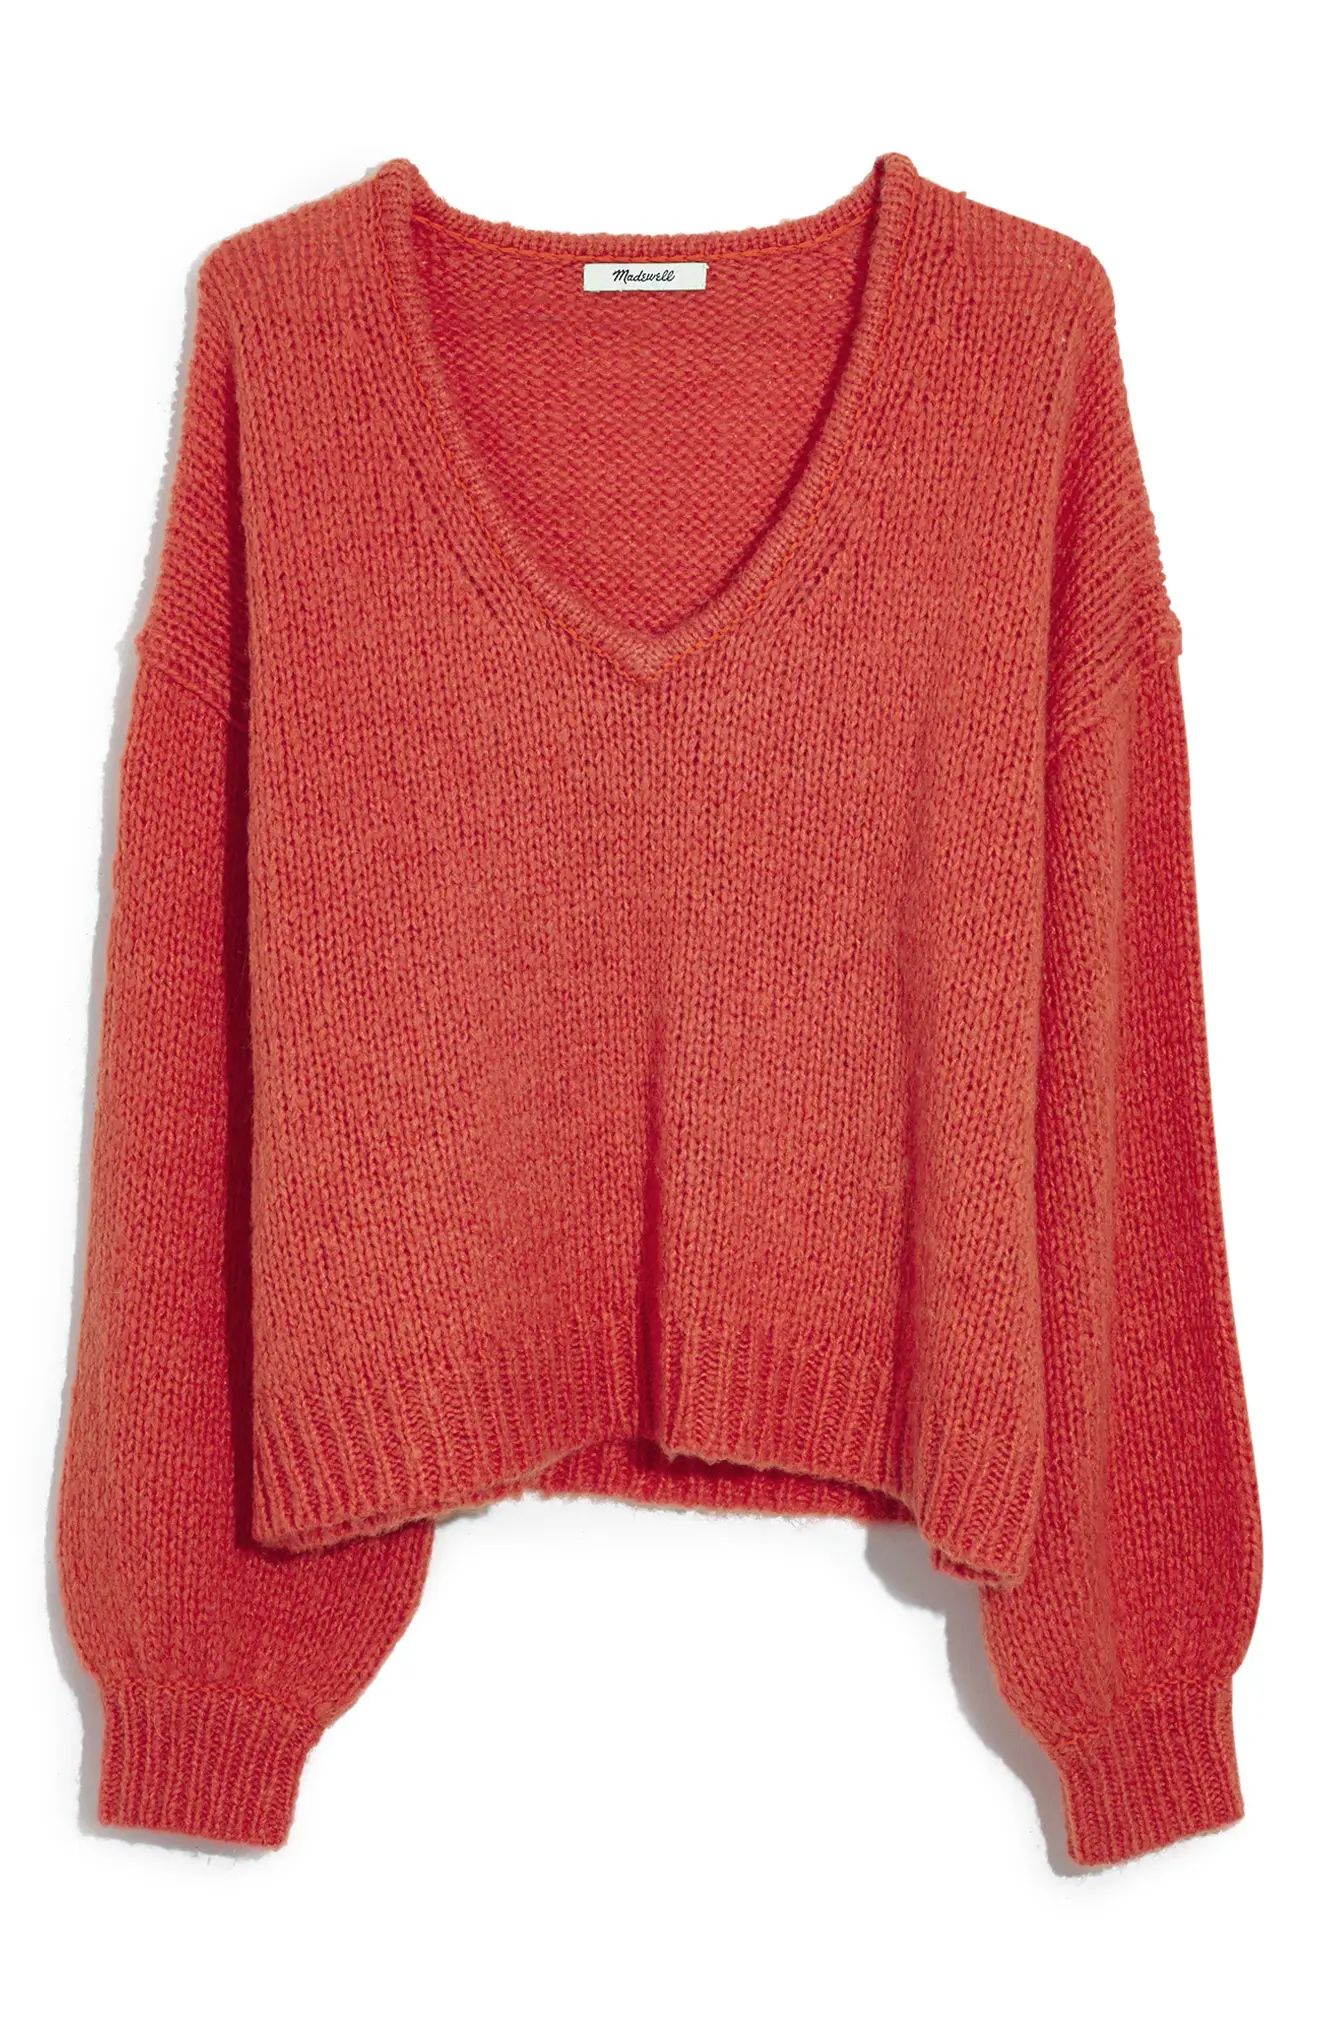 Women's Madewell Balloon Sleeve Pullover Sweater, Size X-Small - Orange | Nordstrom